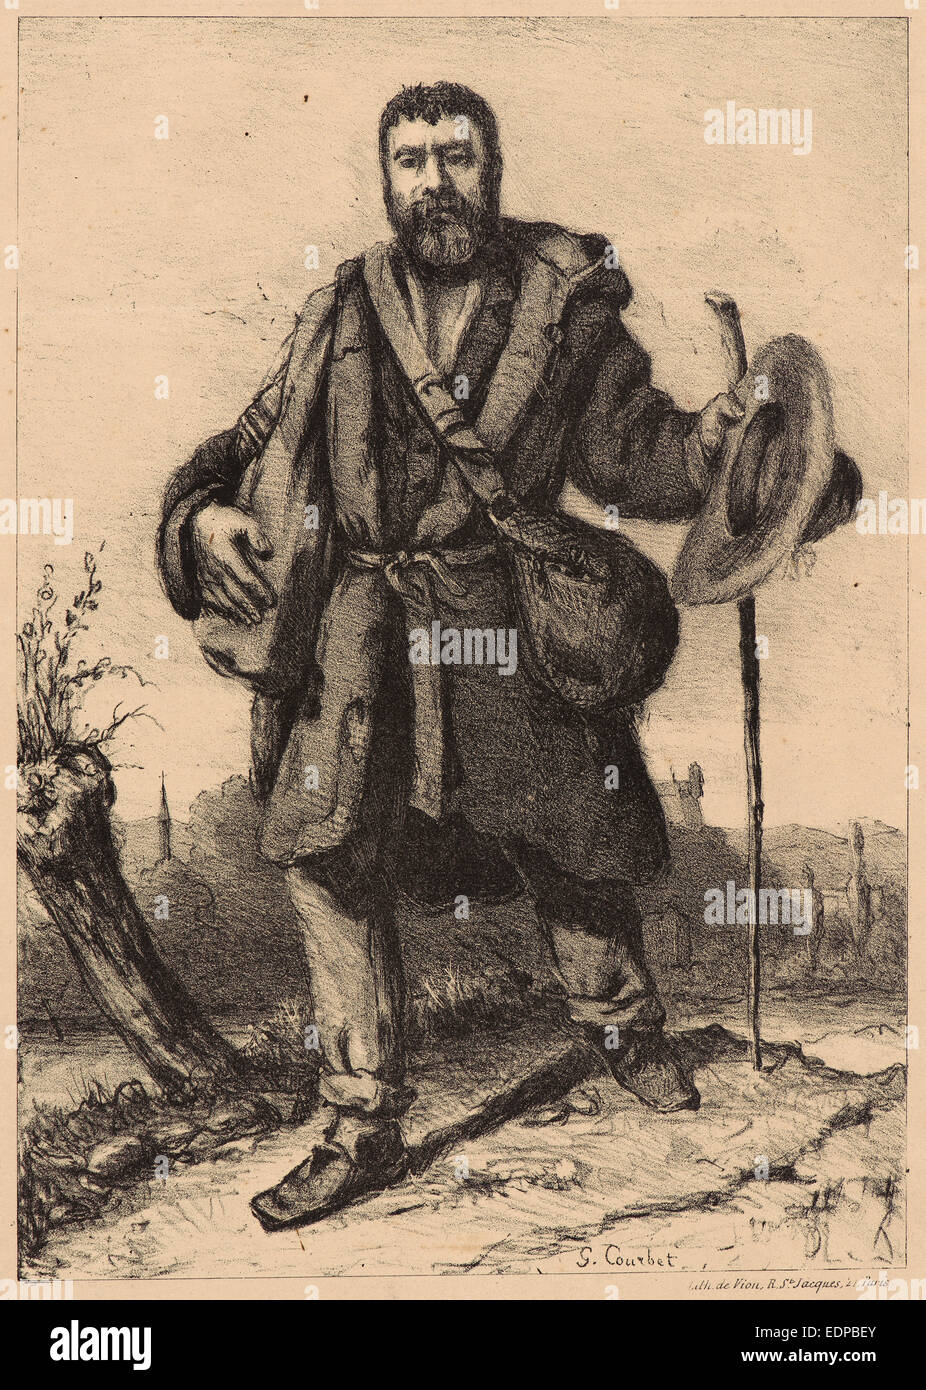 Gustave Courbet (French, 1819 - 1877). Jean Journet on His Way to Conquer the World, ca. 1850. Lithograph Stock Photo